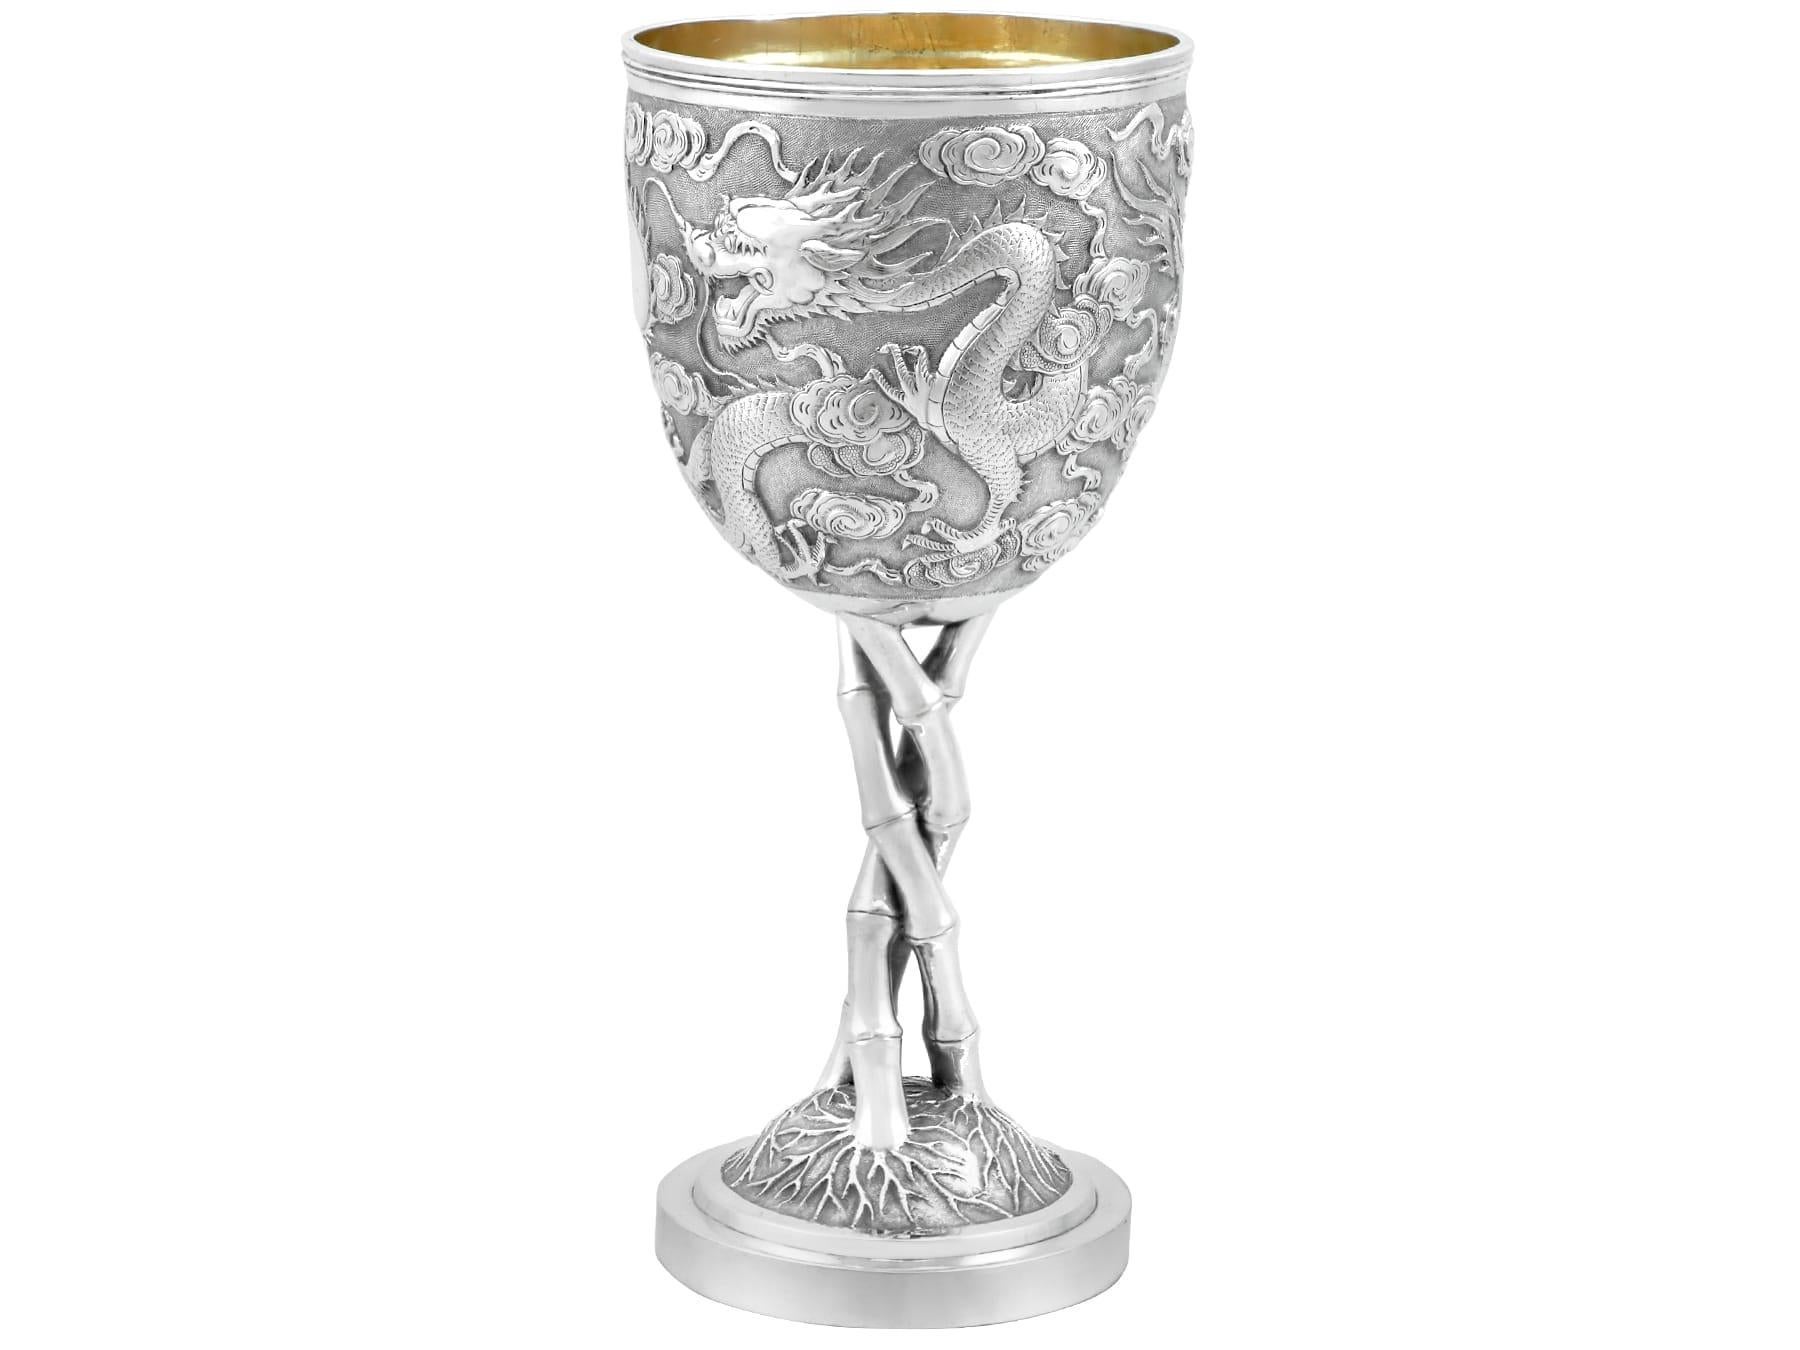 Antique Chinese Export Silver Wine Goblet By Tuck Chang & Co. In Excellent Condition For Sale In Jesmond, Newcastle Upon Tyne